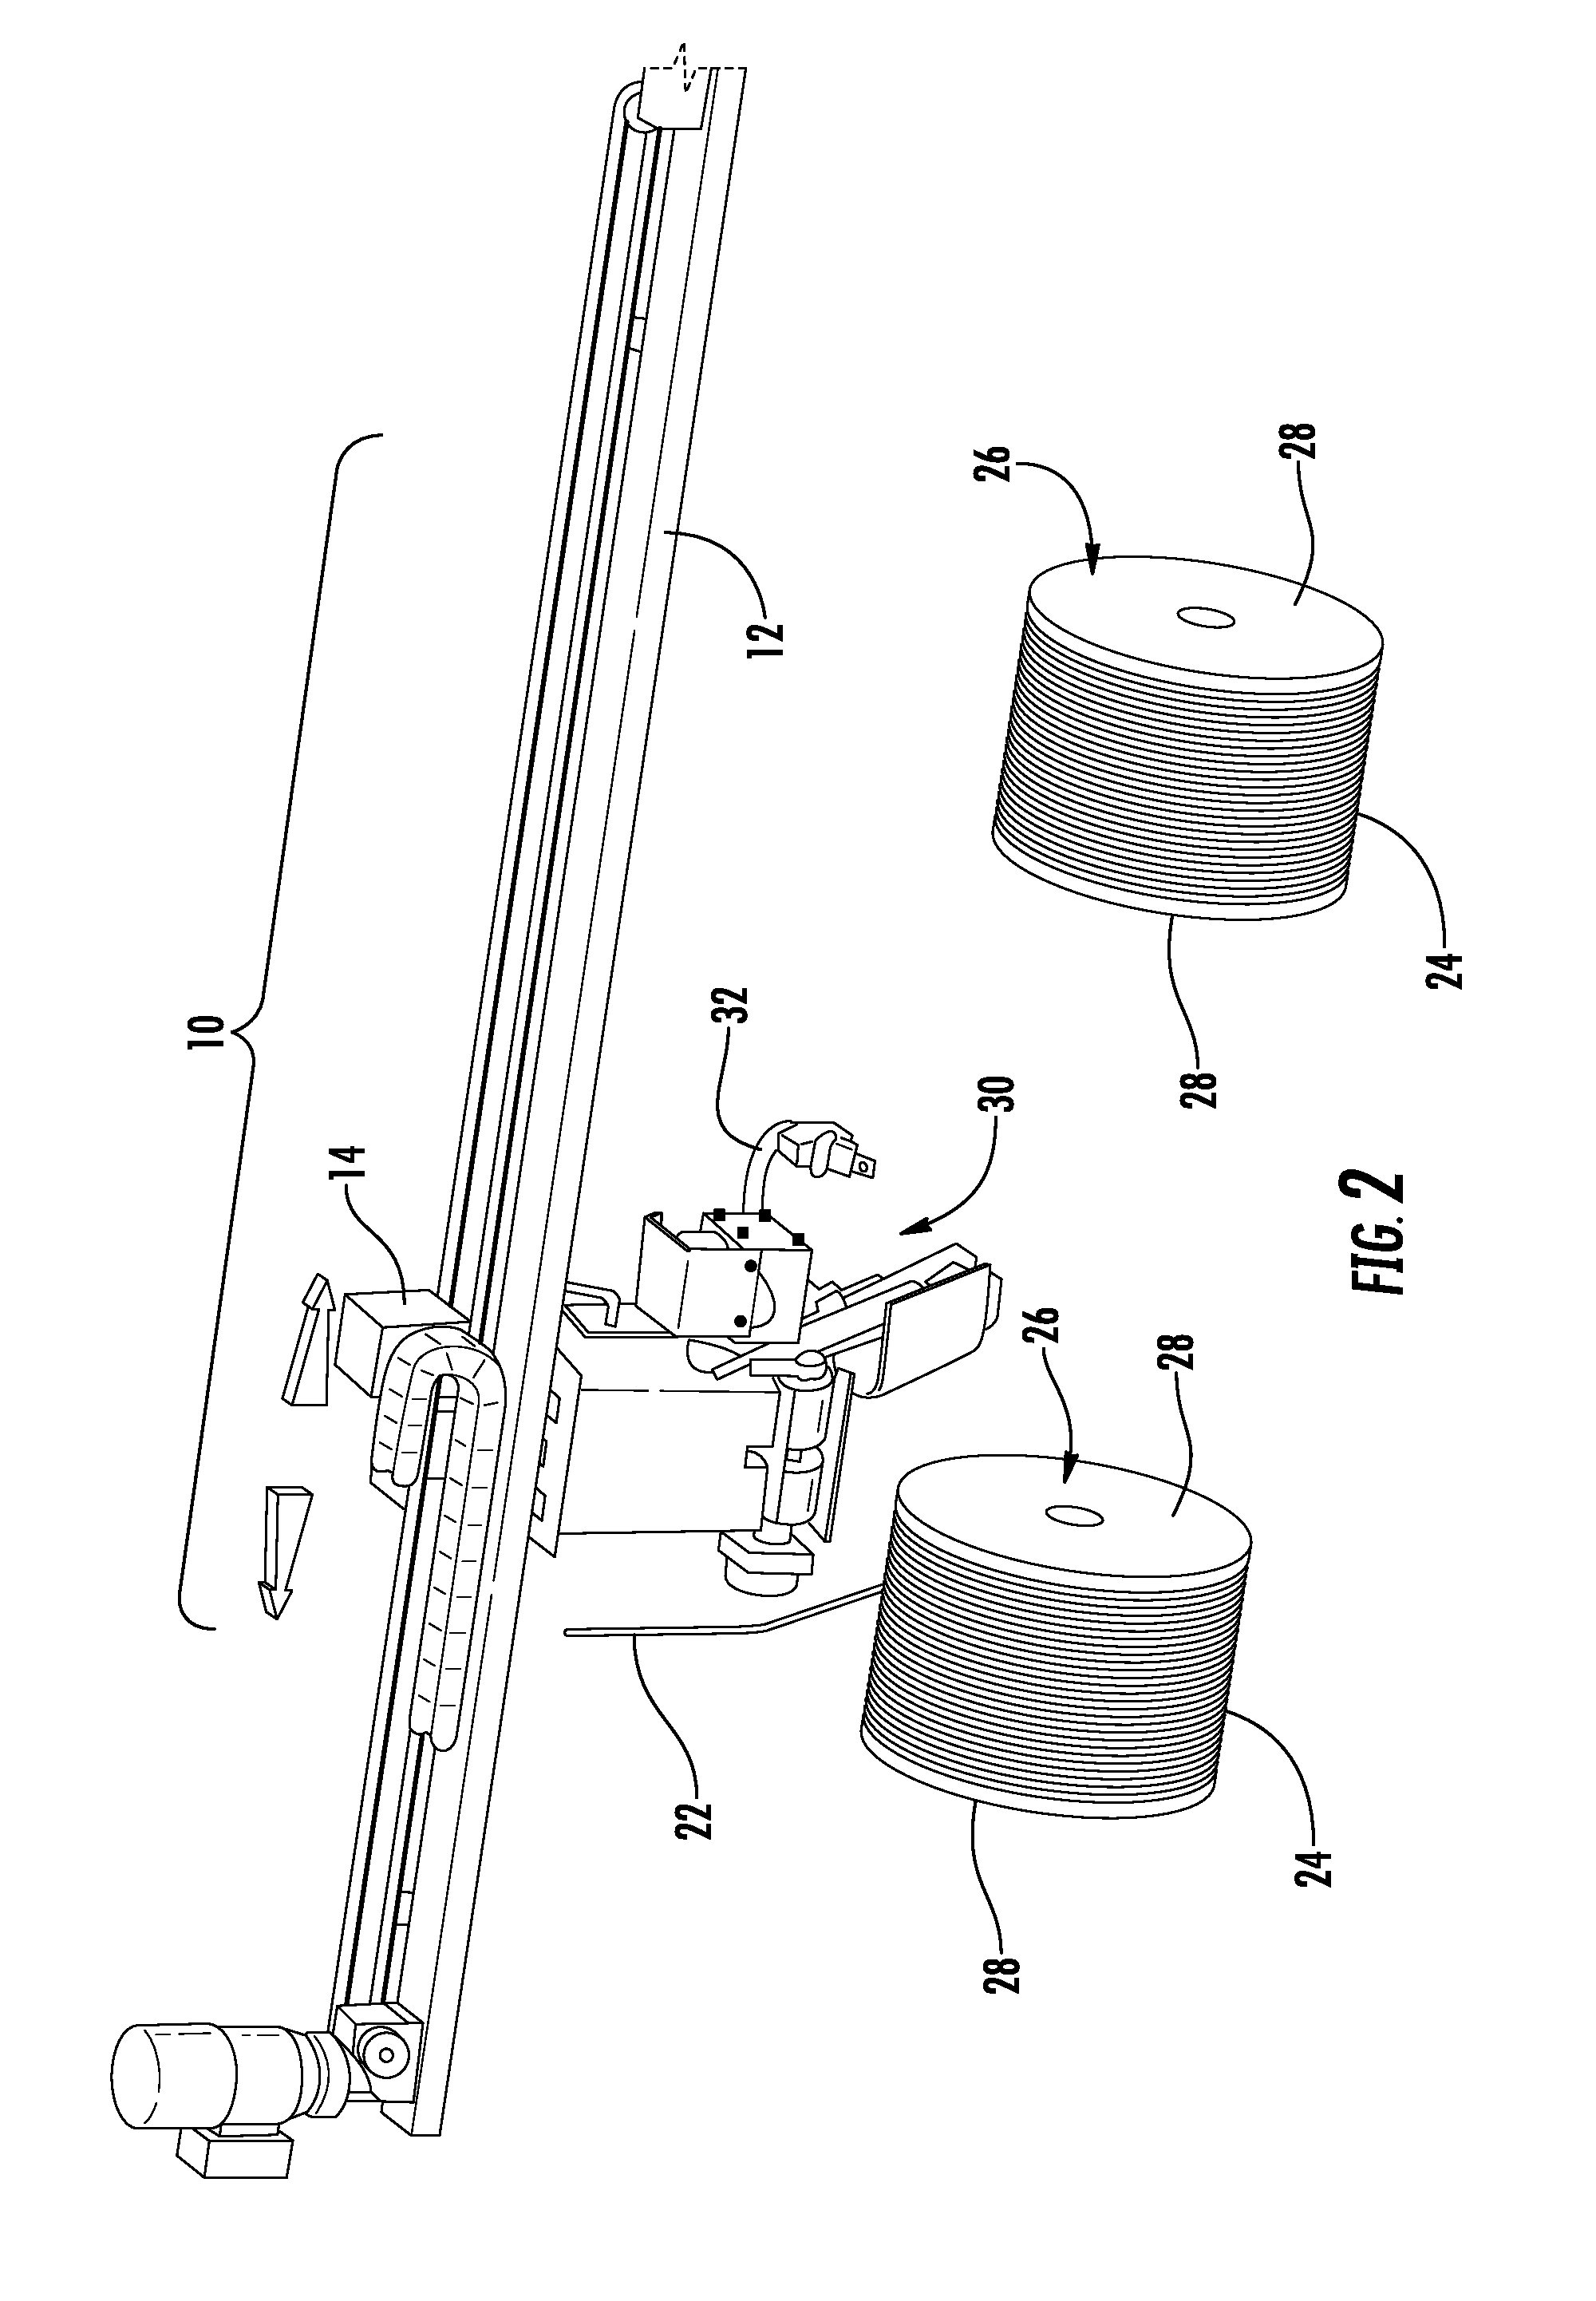 System and method for securing free end of wound cable